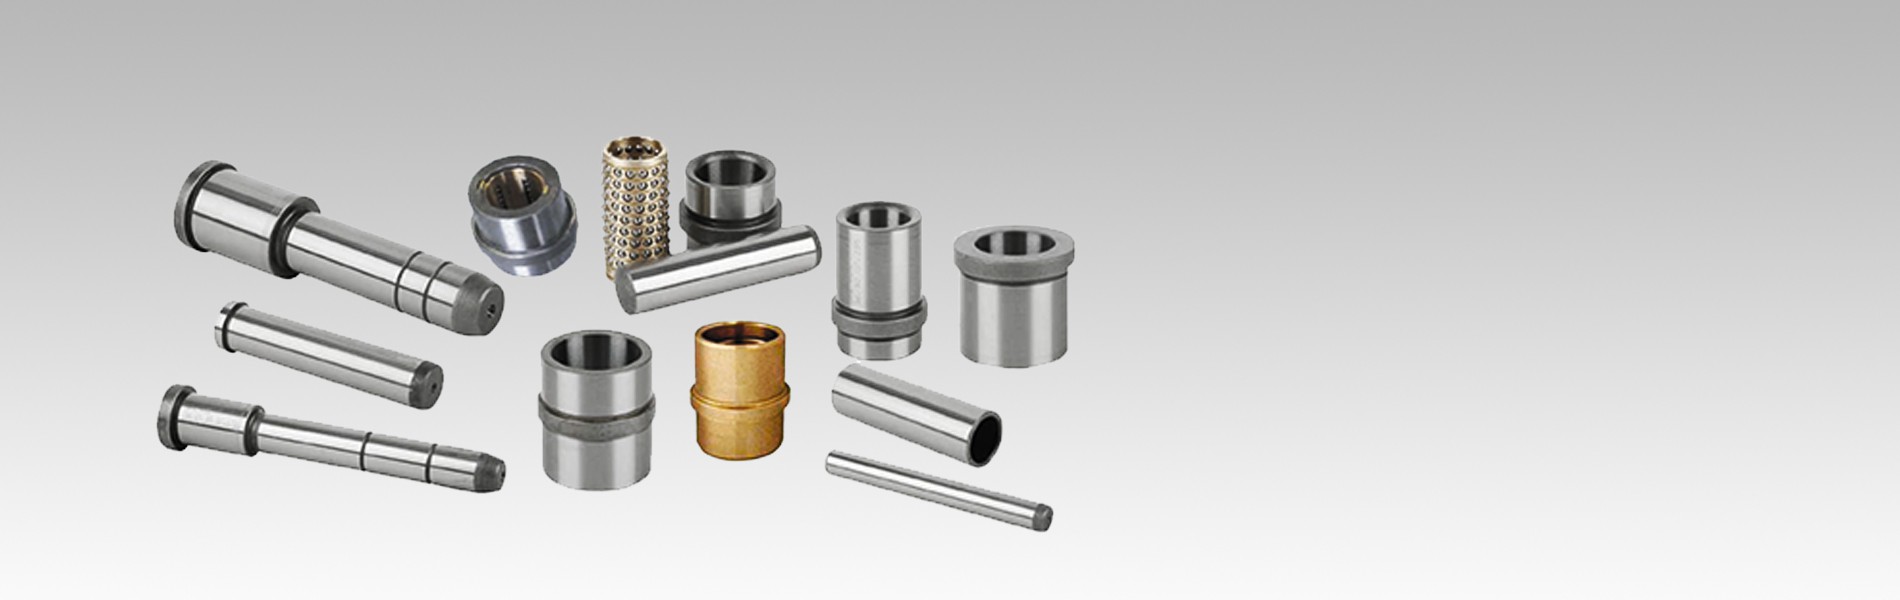 Mold Components